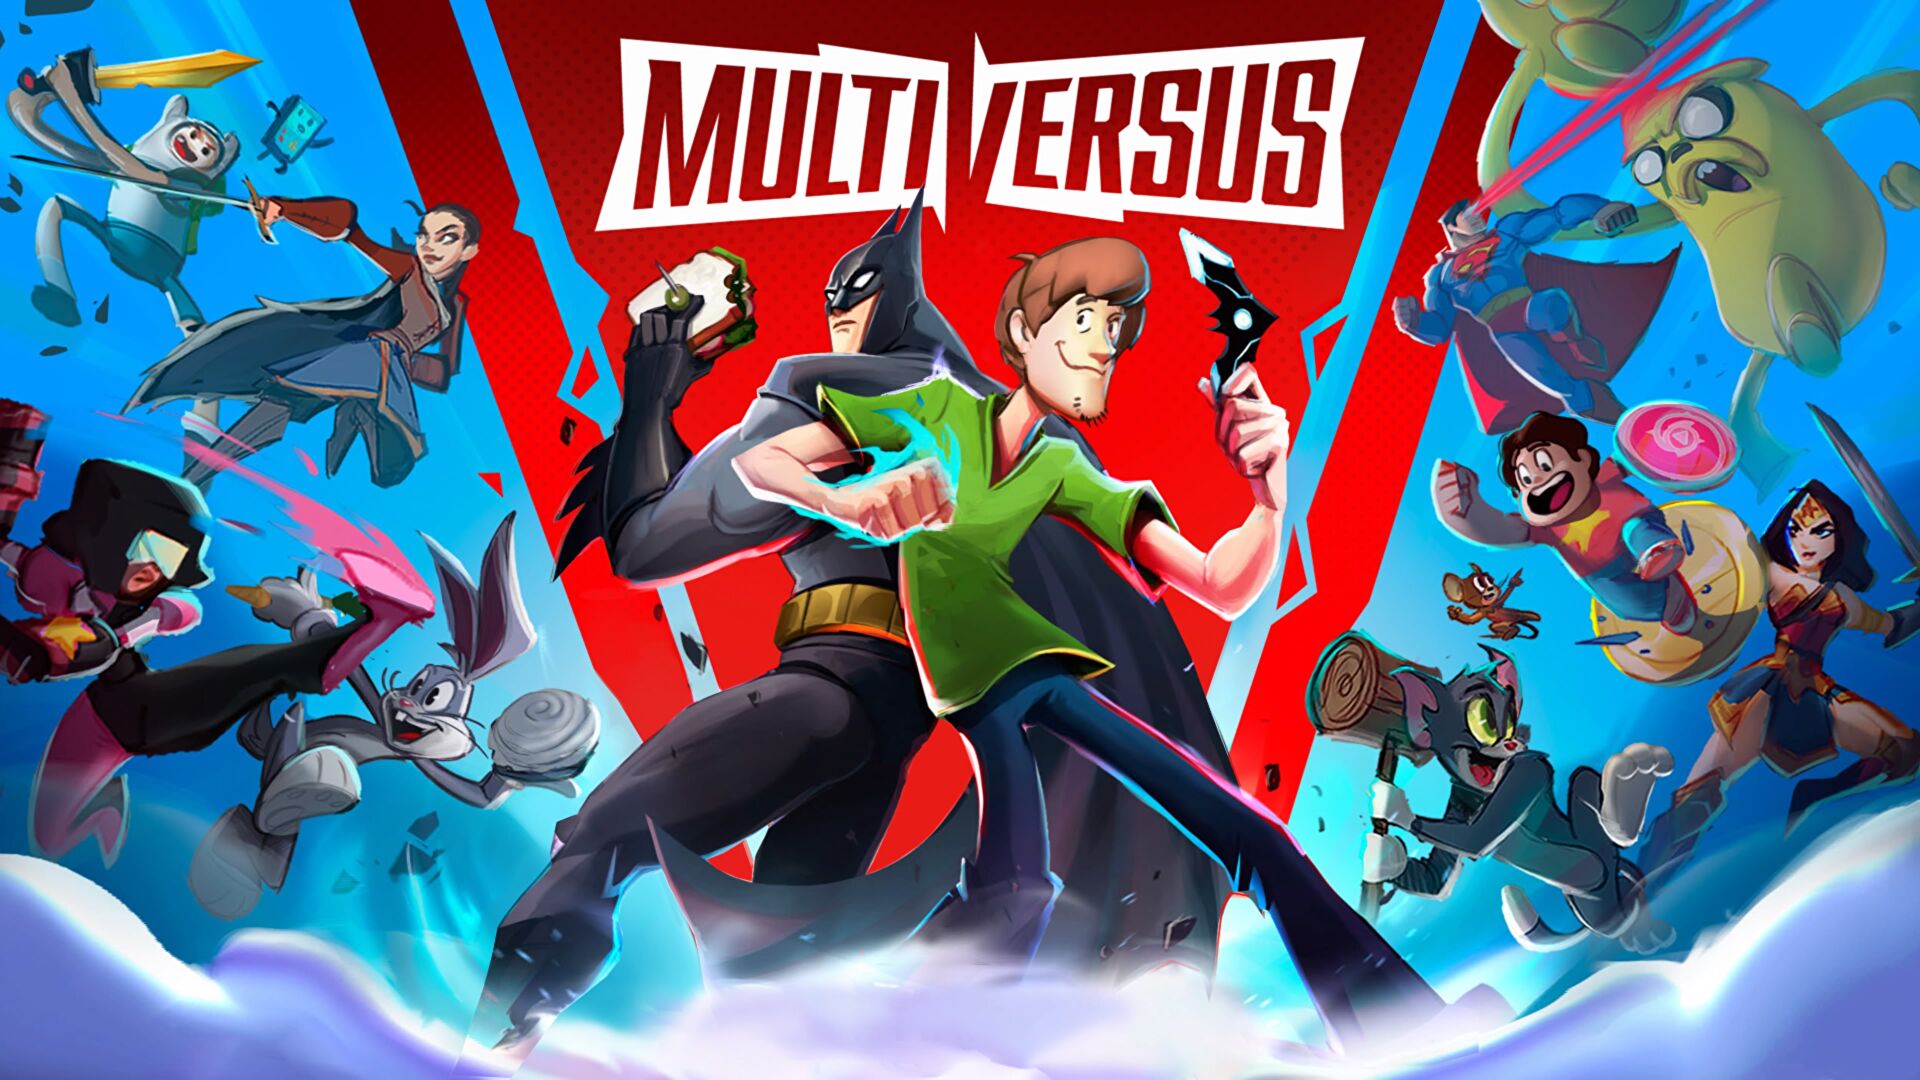 Multiversus is surprisingly shaping up to be a proper Smash Bros. challenger